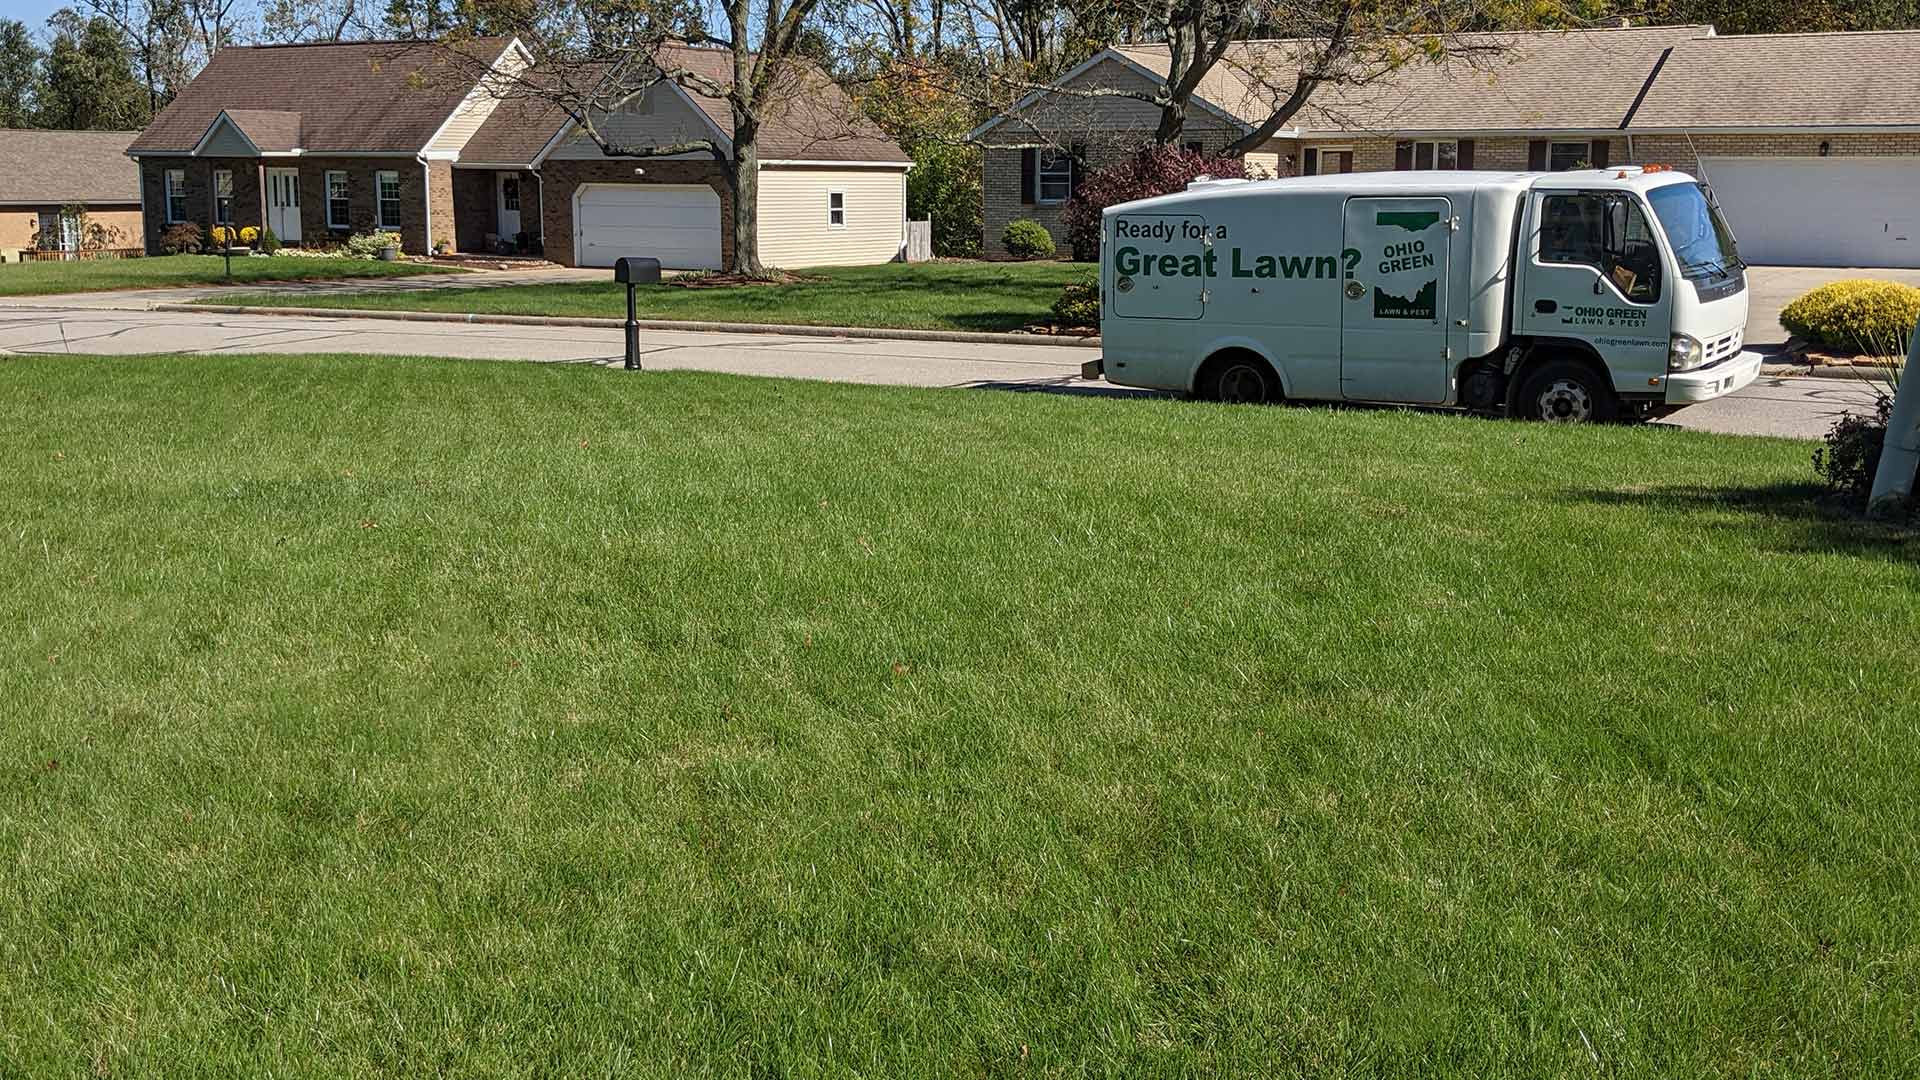 Ohio Green Lawn & Pest service truck by a well-fertilized lawn in Mansfield, OH.